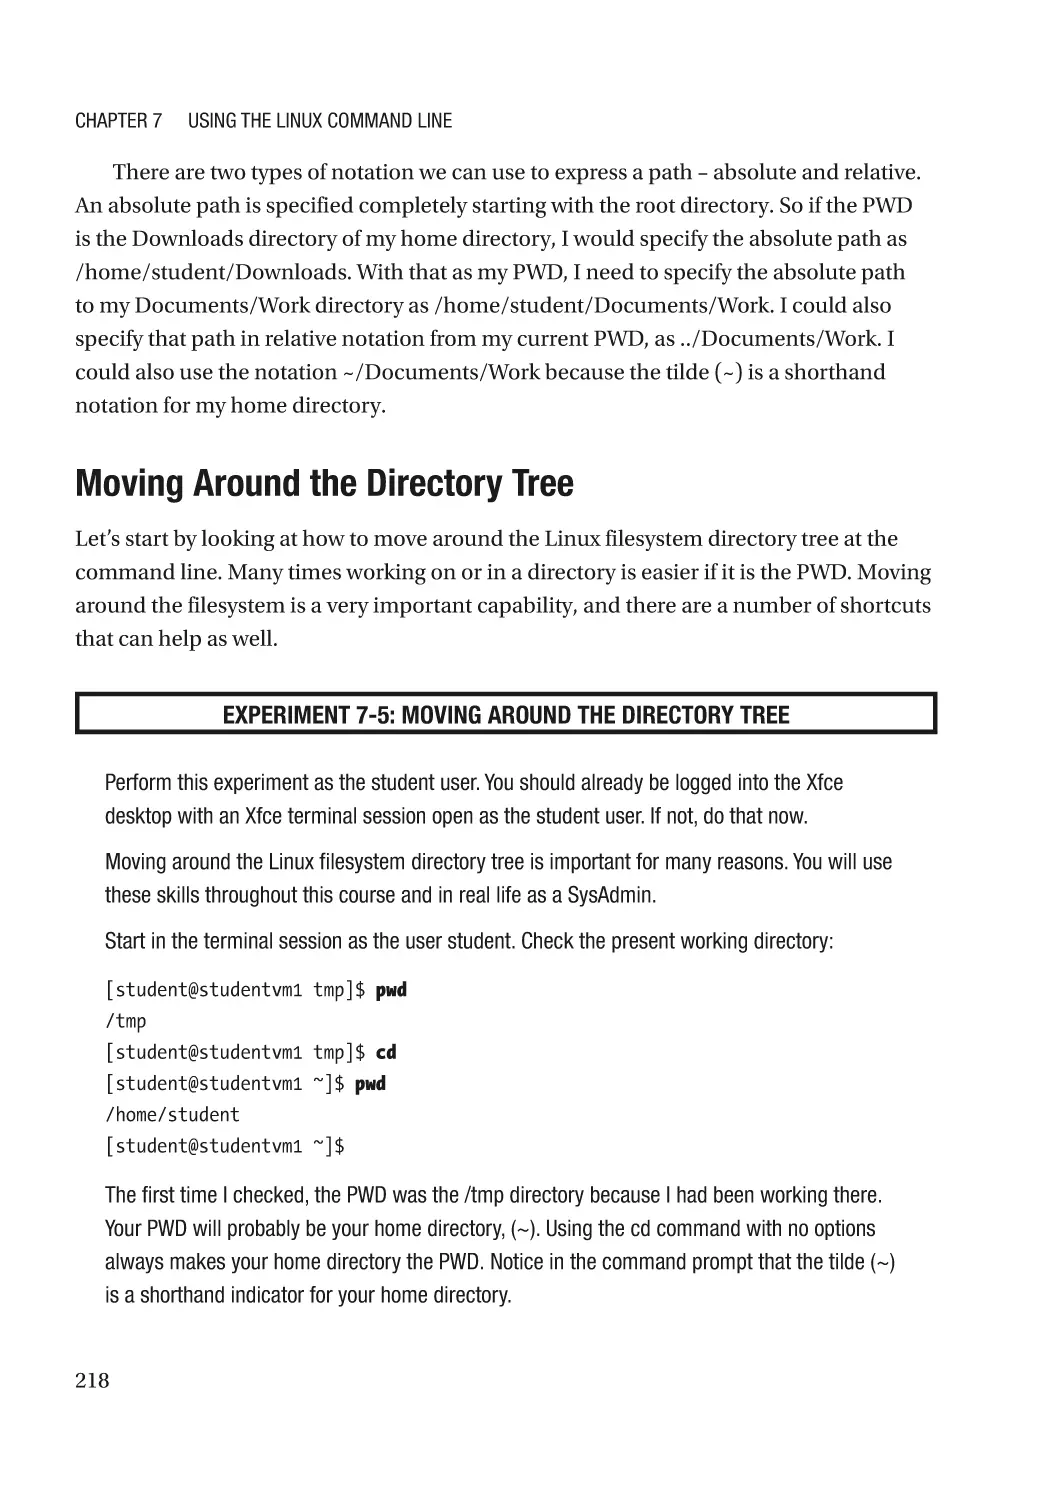 Moving Around the Directory Tree